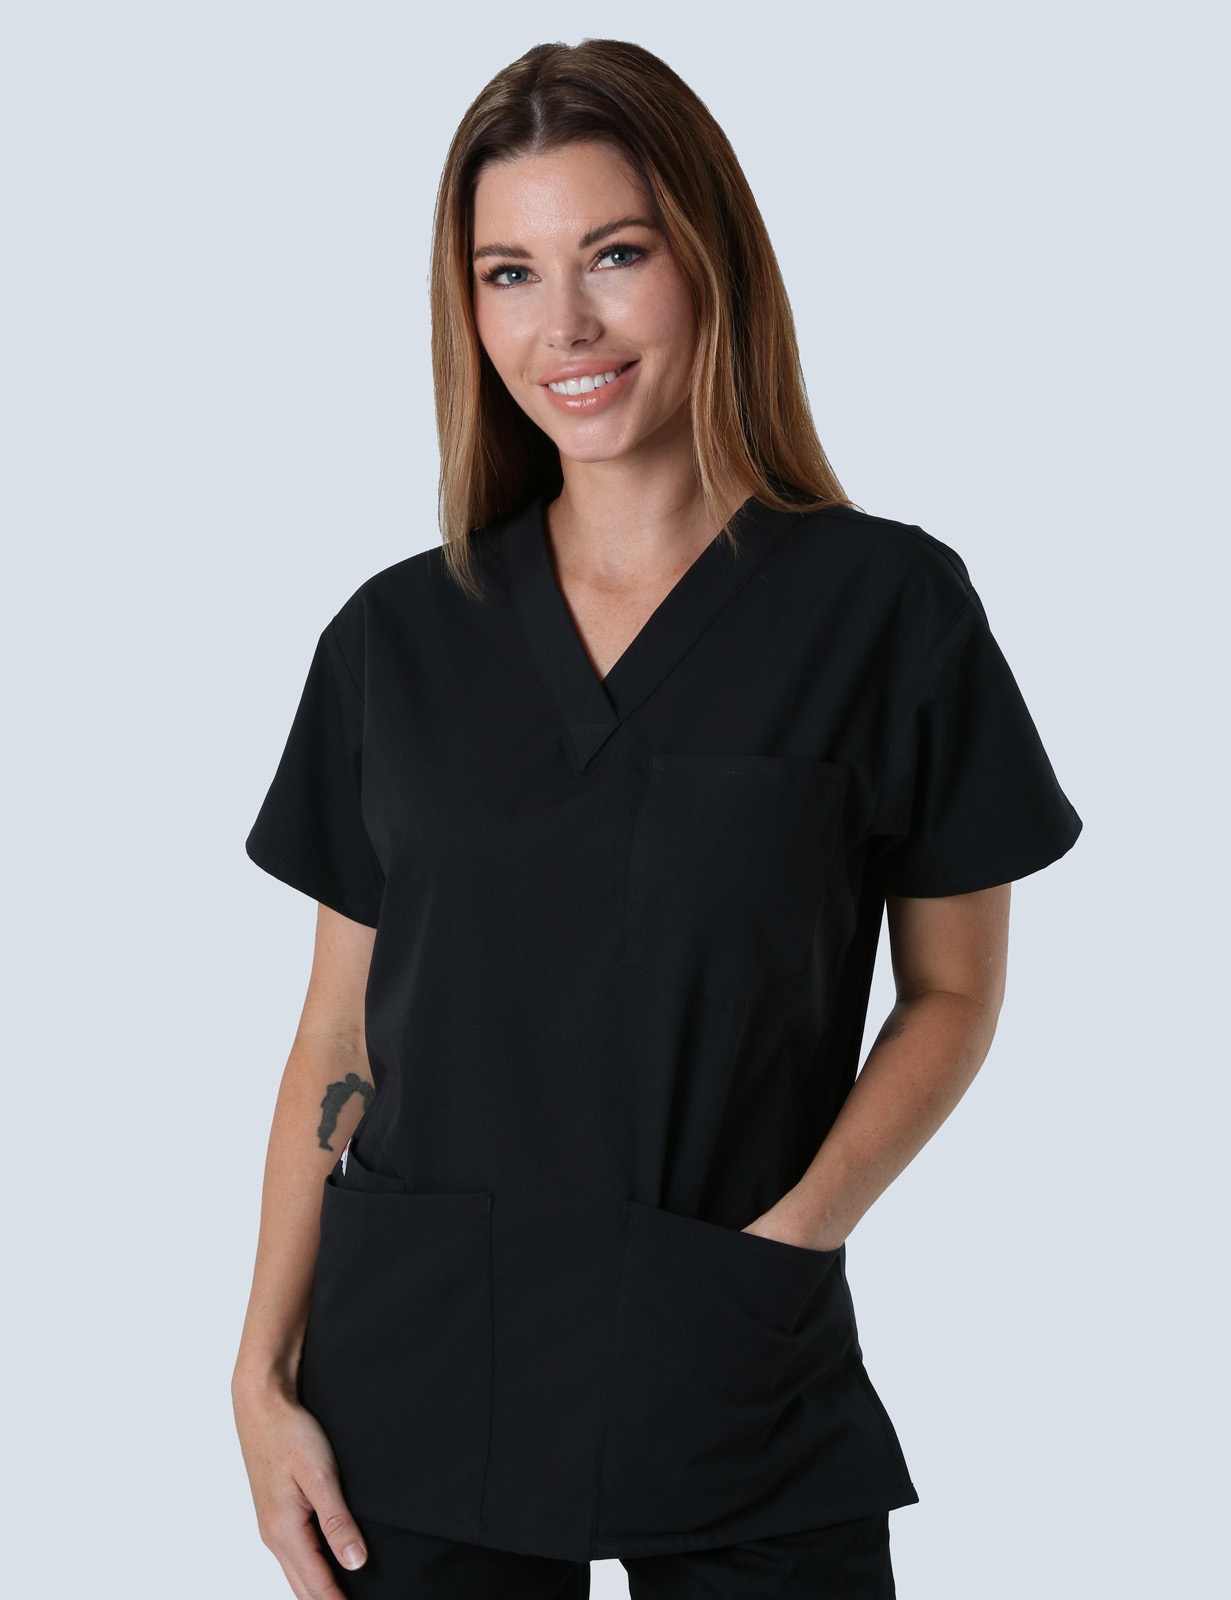 Holmesglen Private Hospital - ED RN (4 Pocket Scrub Top and Cargo Pants in Black incl Logos)